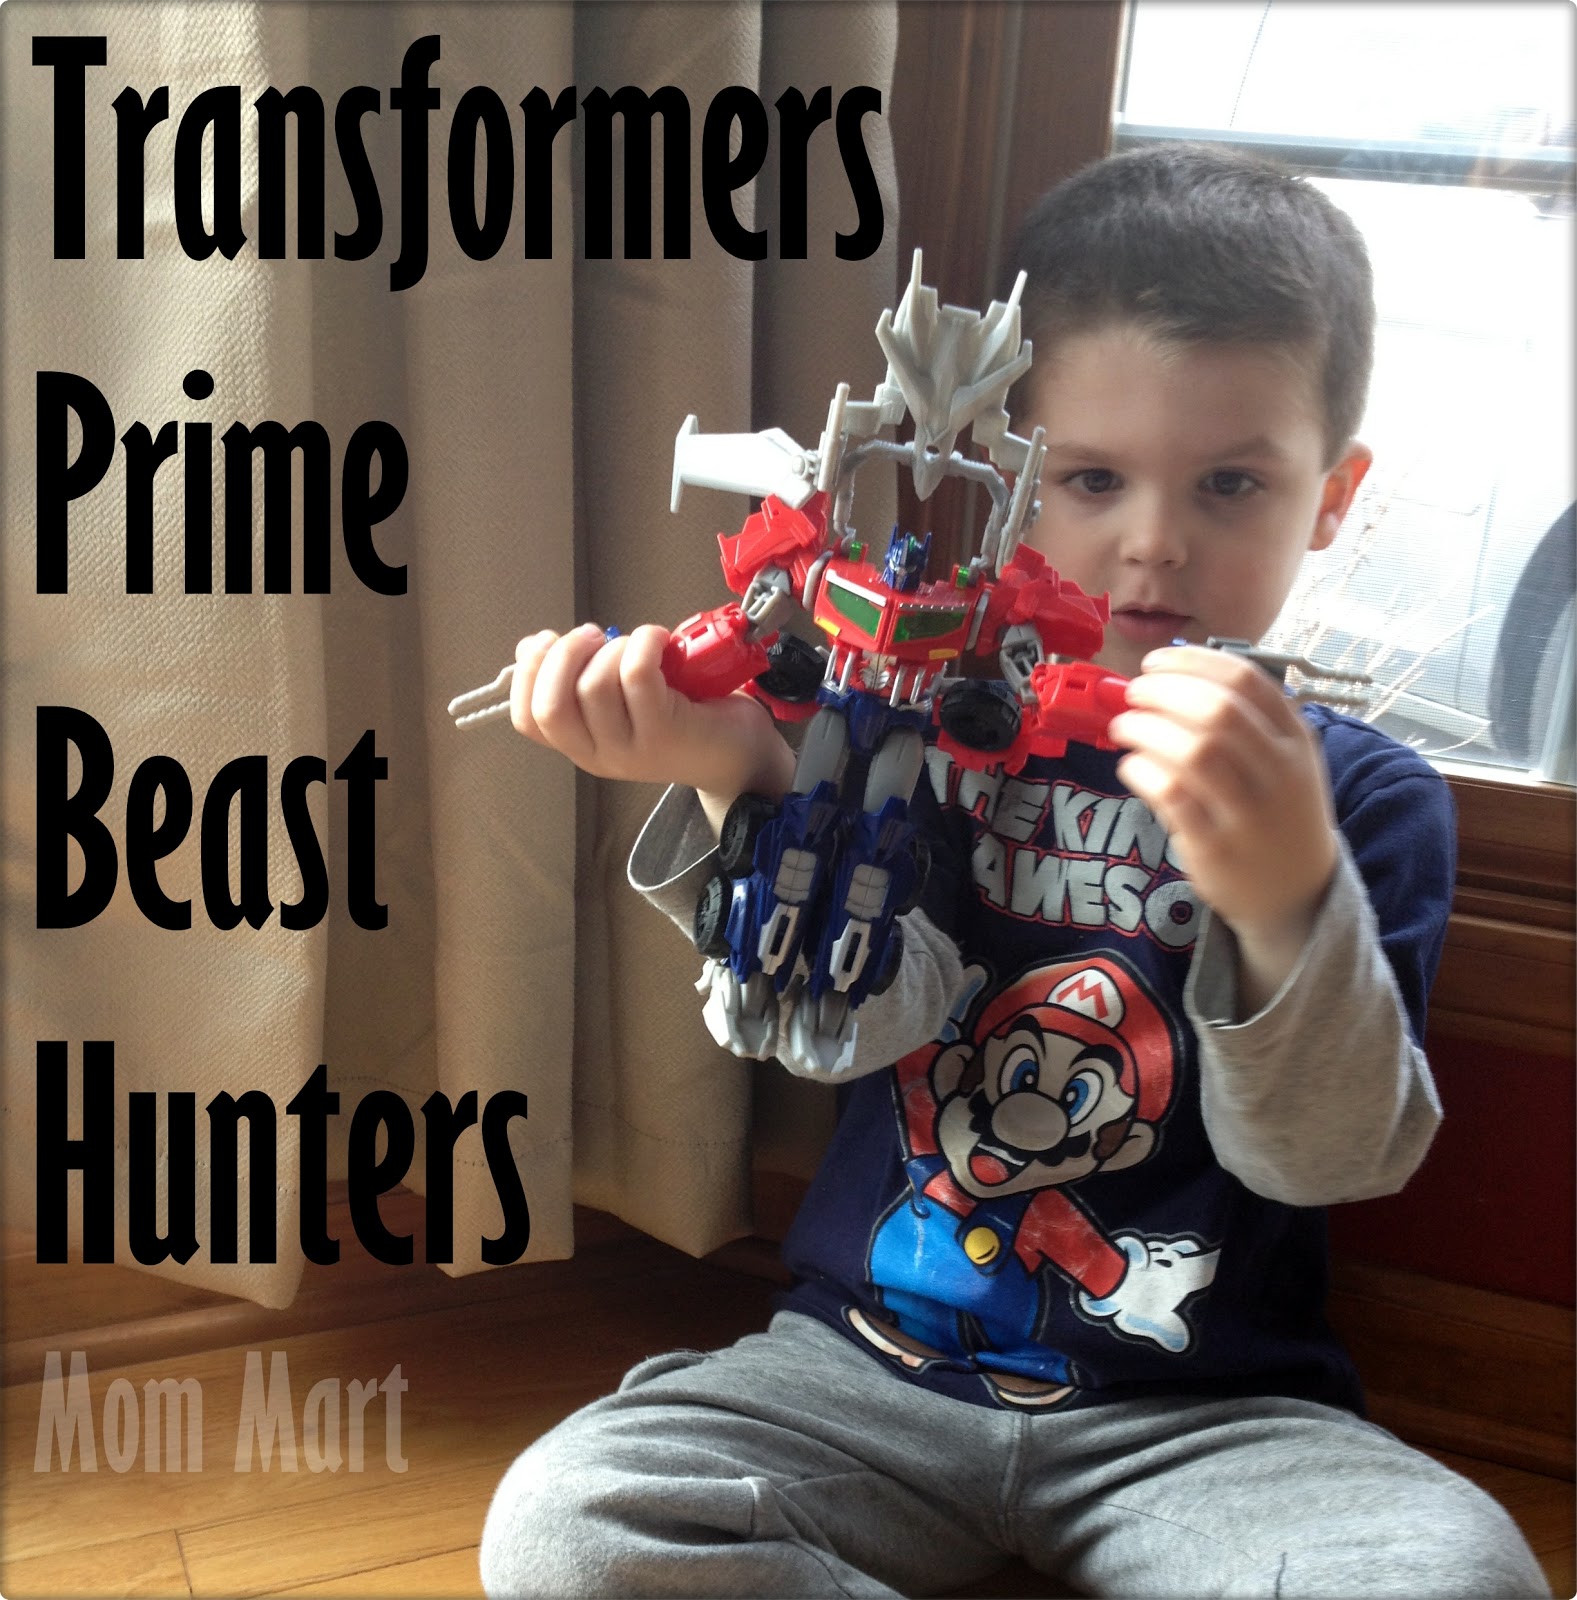 Year 2012 Transformers Prime Beast Hunters Series Deluxe Class 6